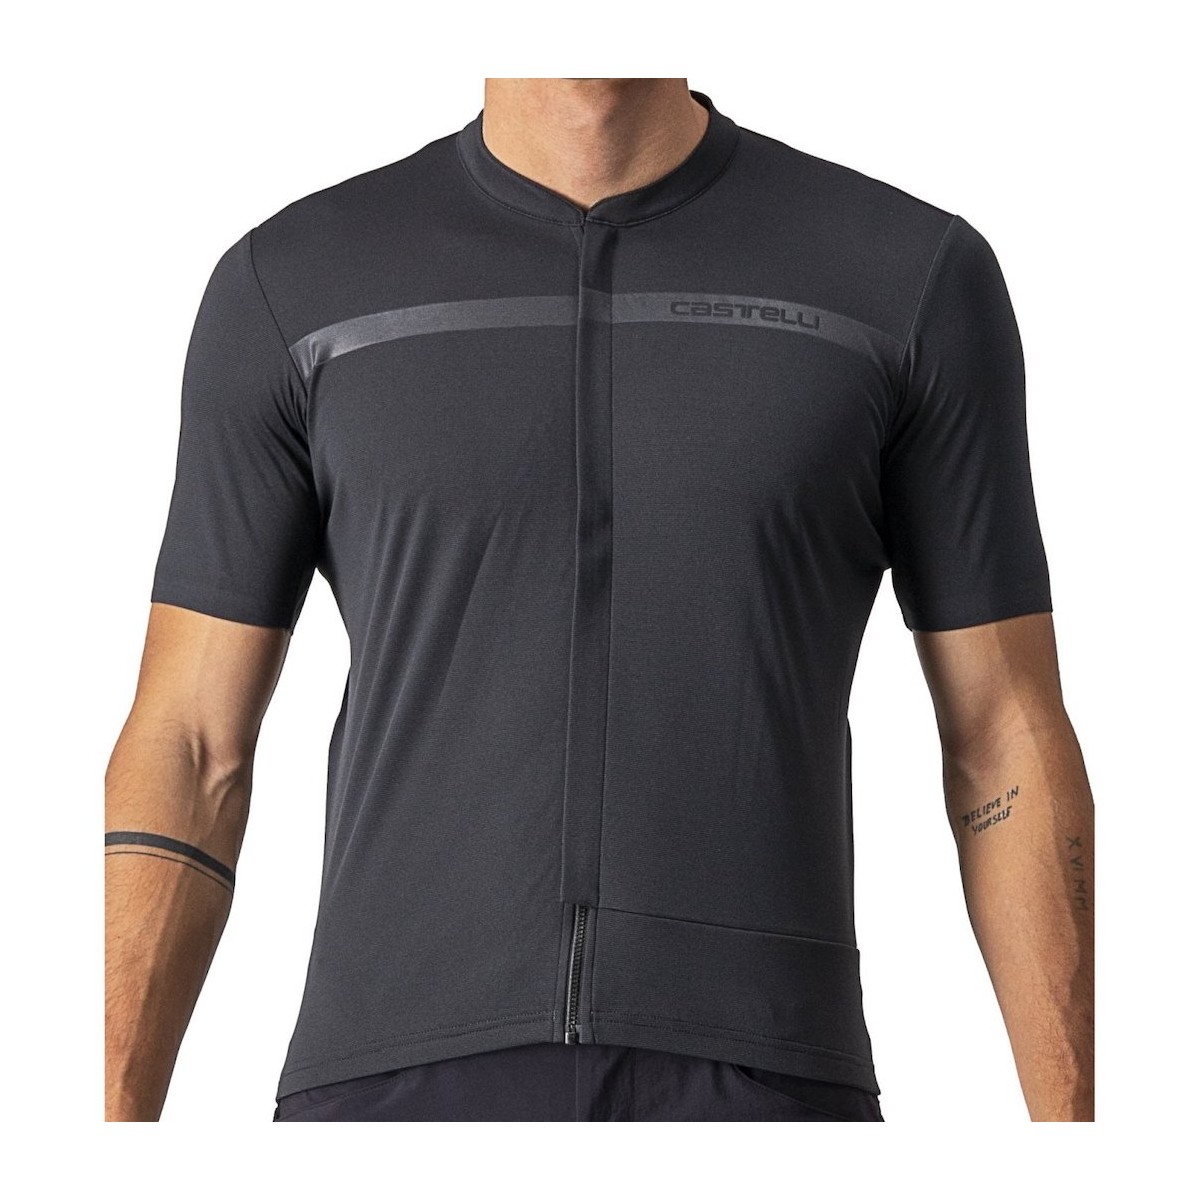 CASTELLI UNLIMITED ALL ROAD cycling shirt - black